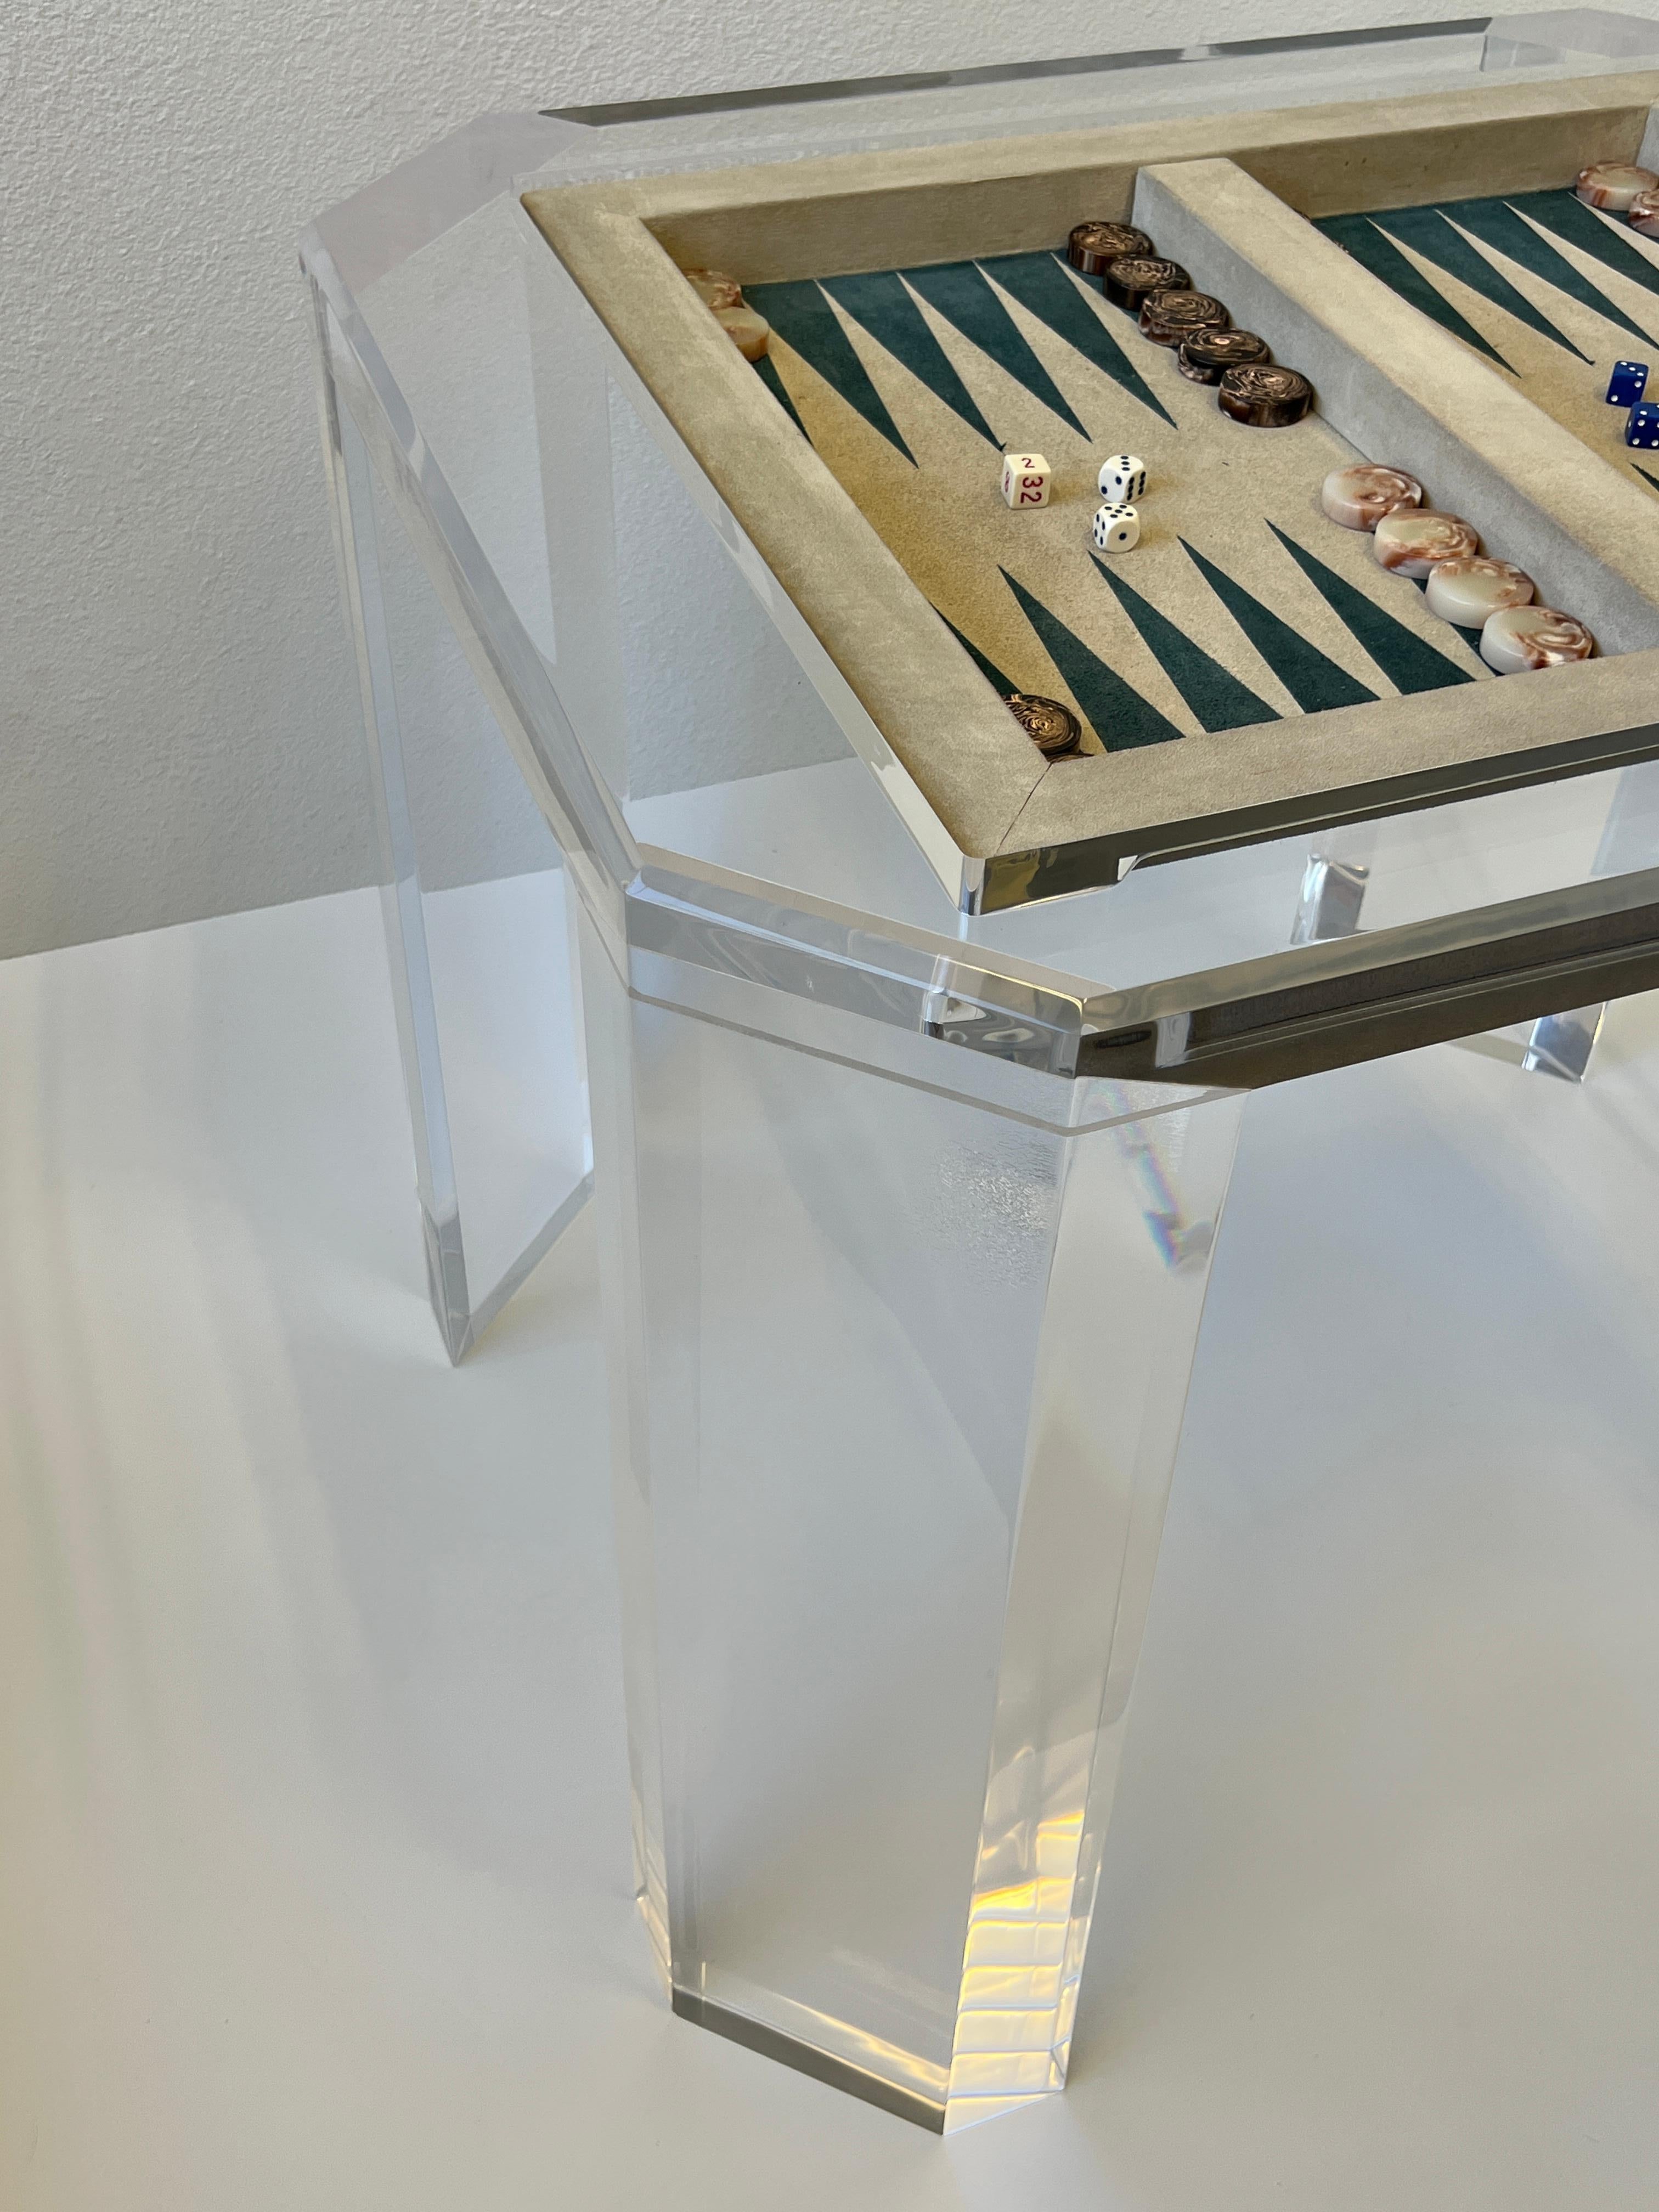 Polished Clear Acrylic and Suede Leather Backgammon Game Table by Charles Hollis Jones